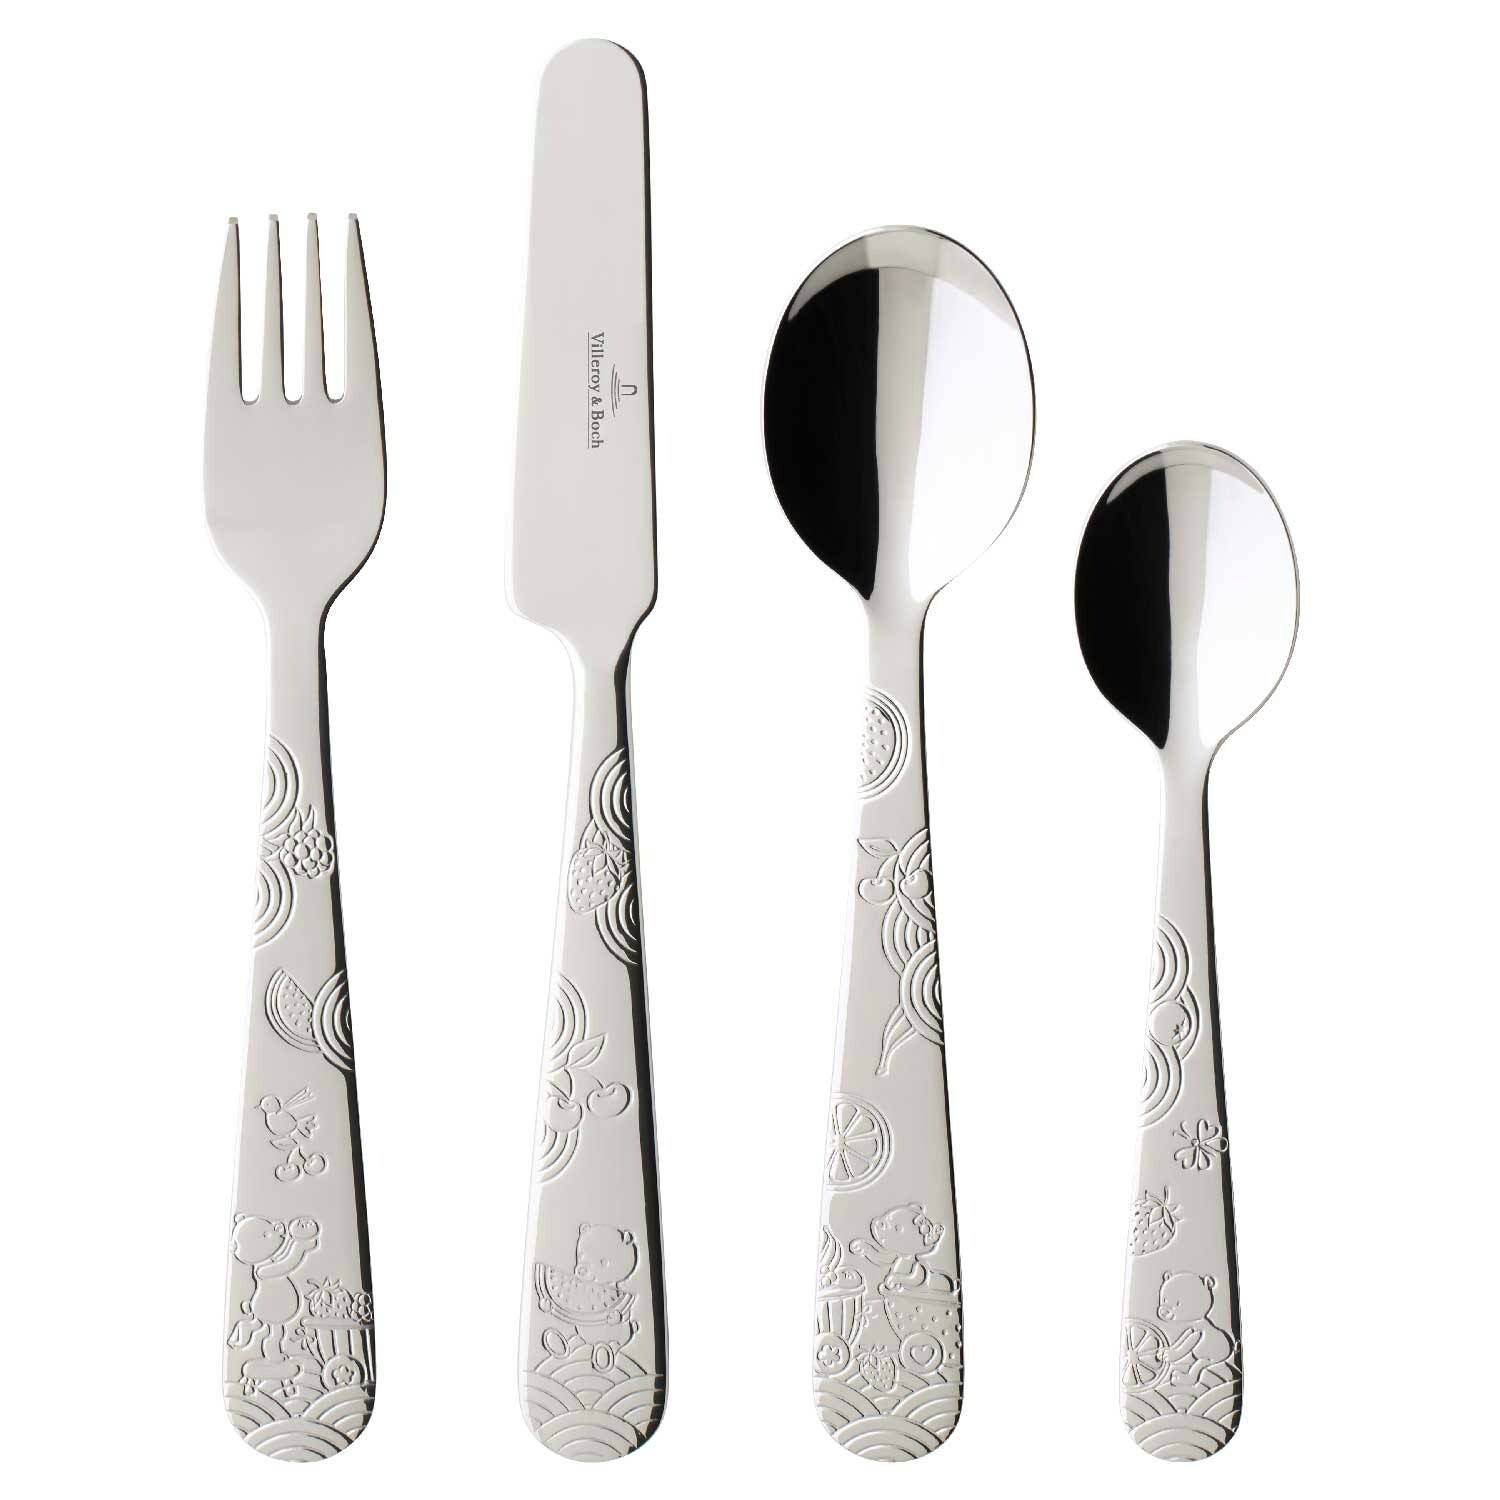 https://royaldesign.com/image/2/villeroy-boch-hungry-as-a-bear-childrens-cutlery-4-pcs-stainless-steel-0